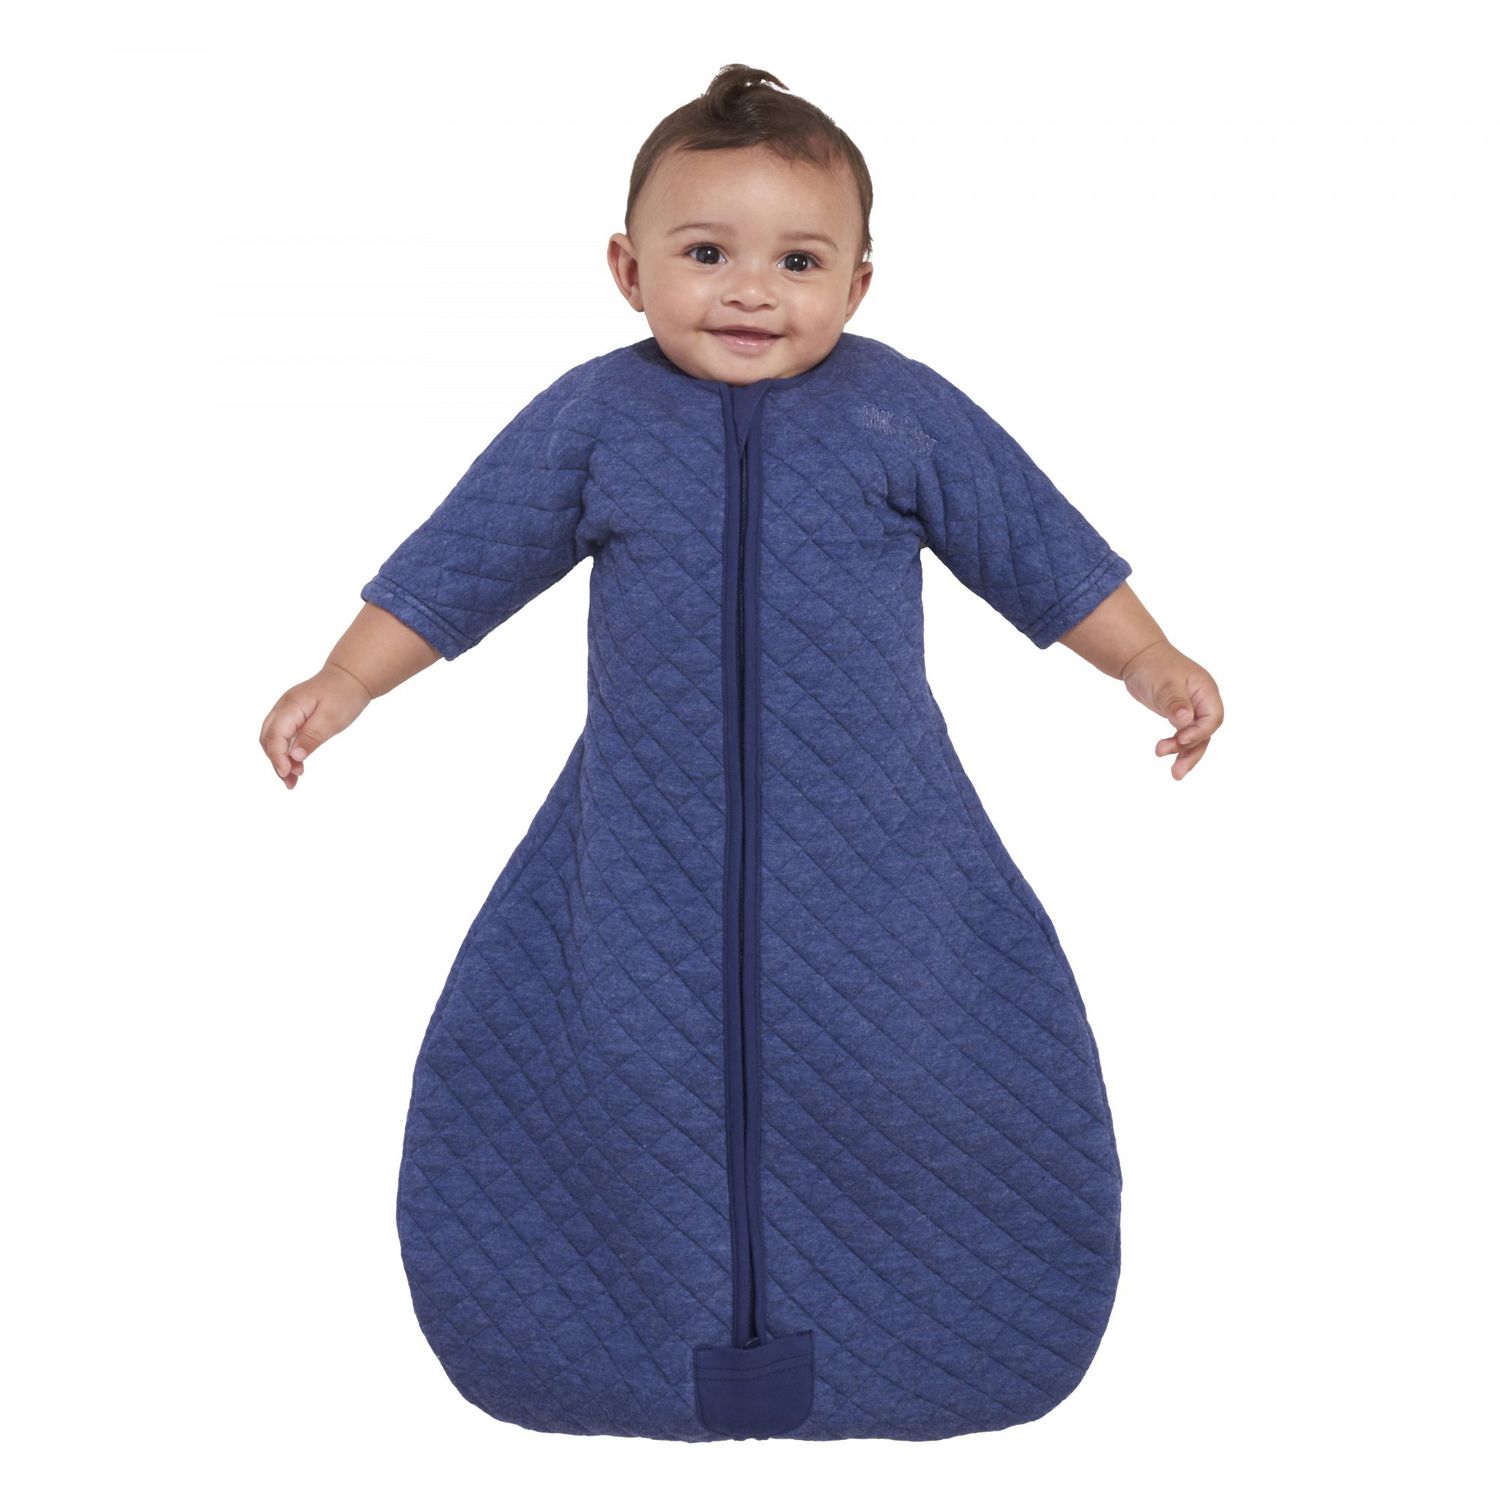 <p>Keeping little ones snug and comfortable during naptime is simple with the Halo Sleepsack Easy Transition. Ashley Condon uses this baby sprinkle gift in place of blankets after her baby outgrew the swaddling stage. "They are cute, easy to put on, and always a good indicator that it's bedtime," she says.</p>
                            